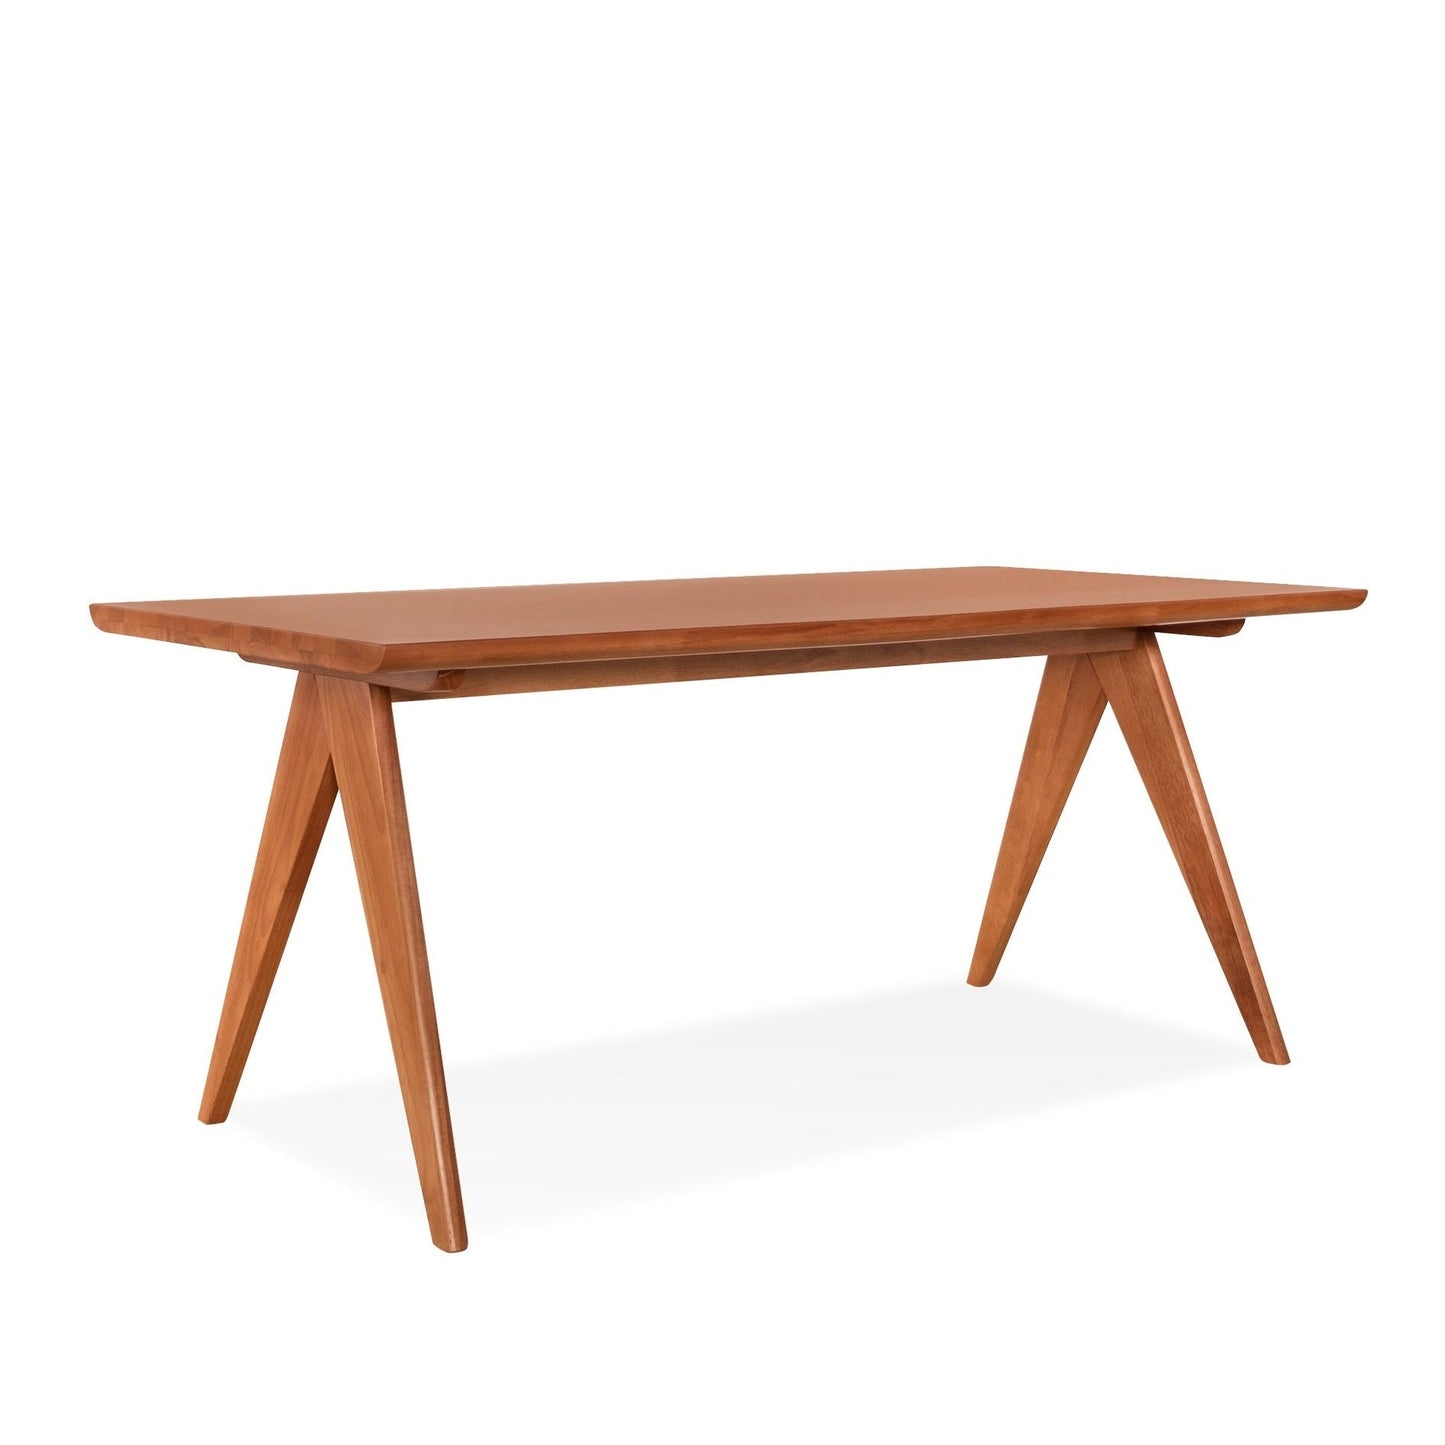 Eleanor 1.8m Dining Table with 4 Eleanor Chairs + 1.3m Eleanor Bench